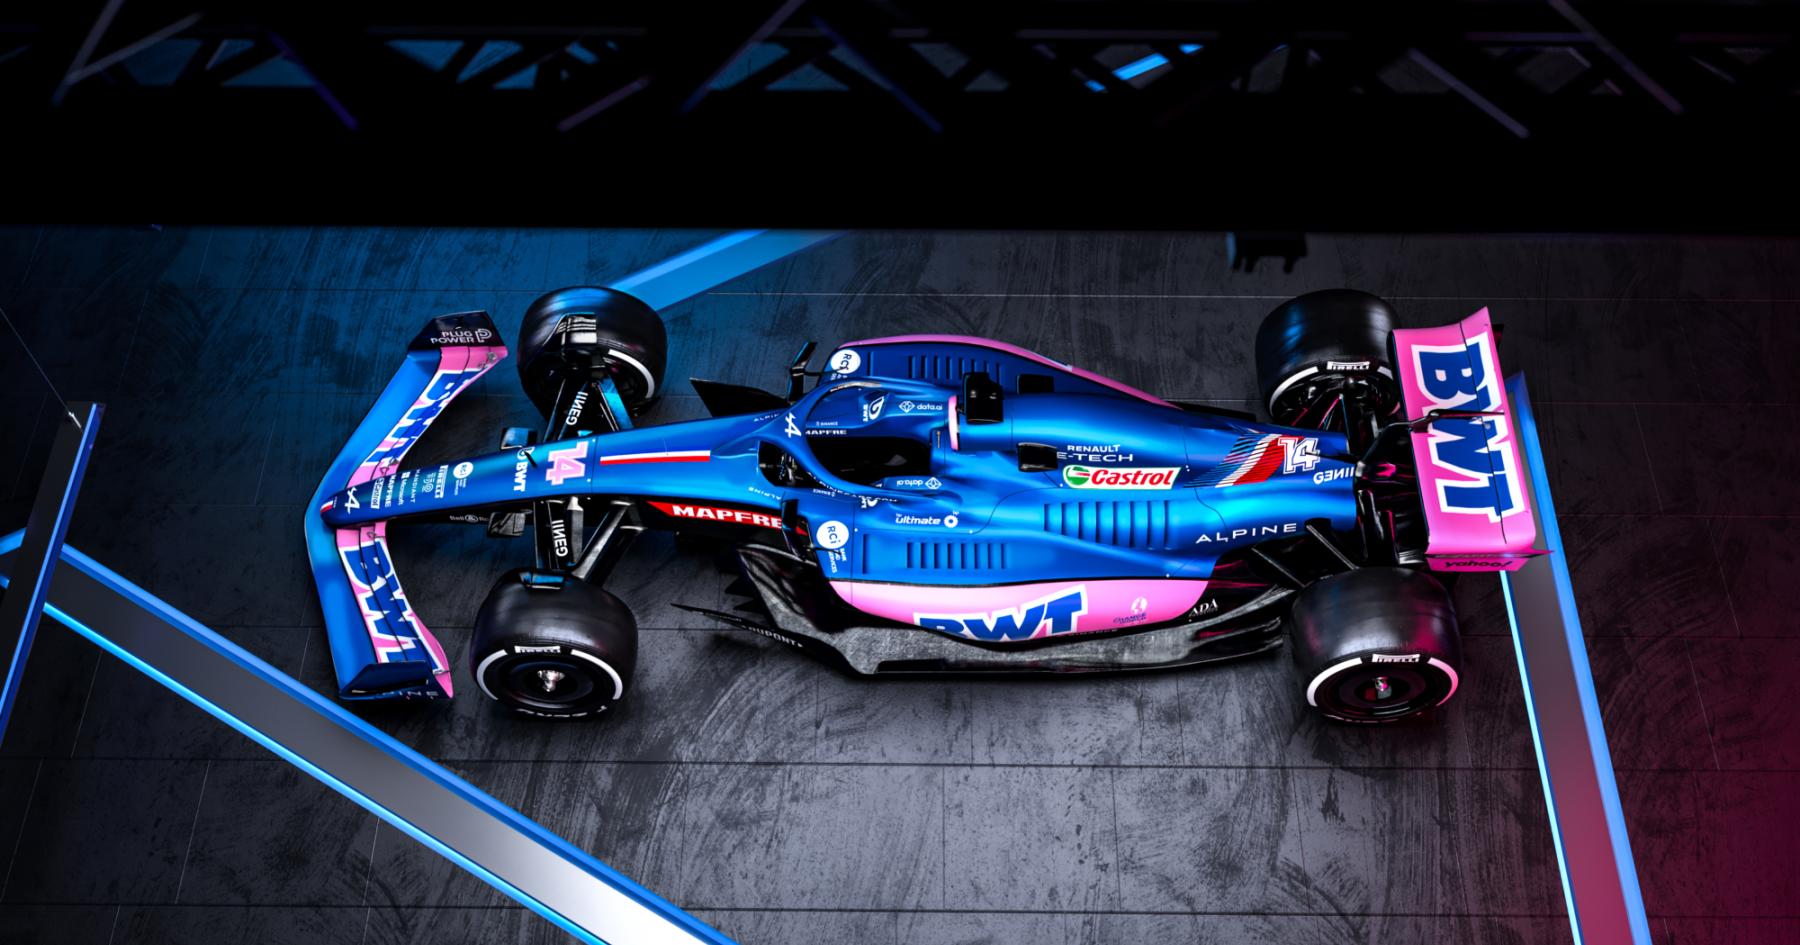 Video: Alpine bring pink back to F1 with their new car